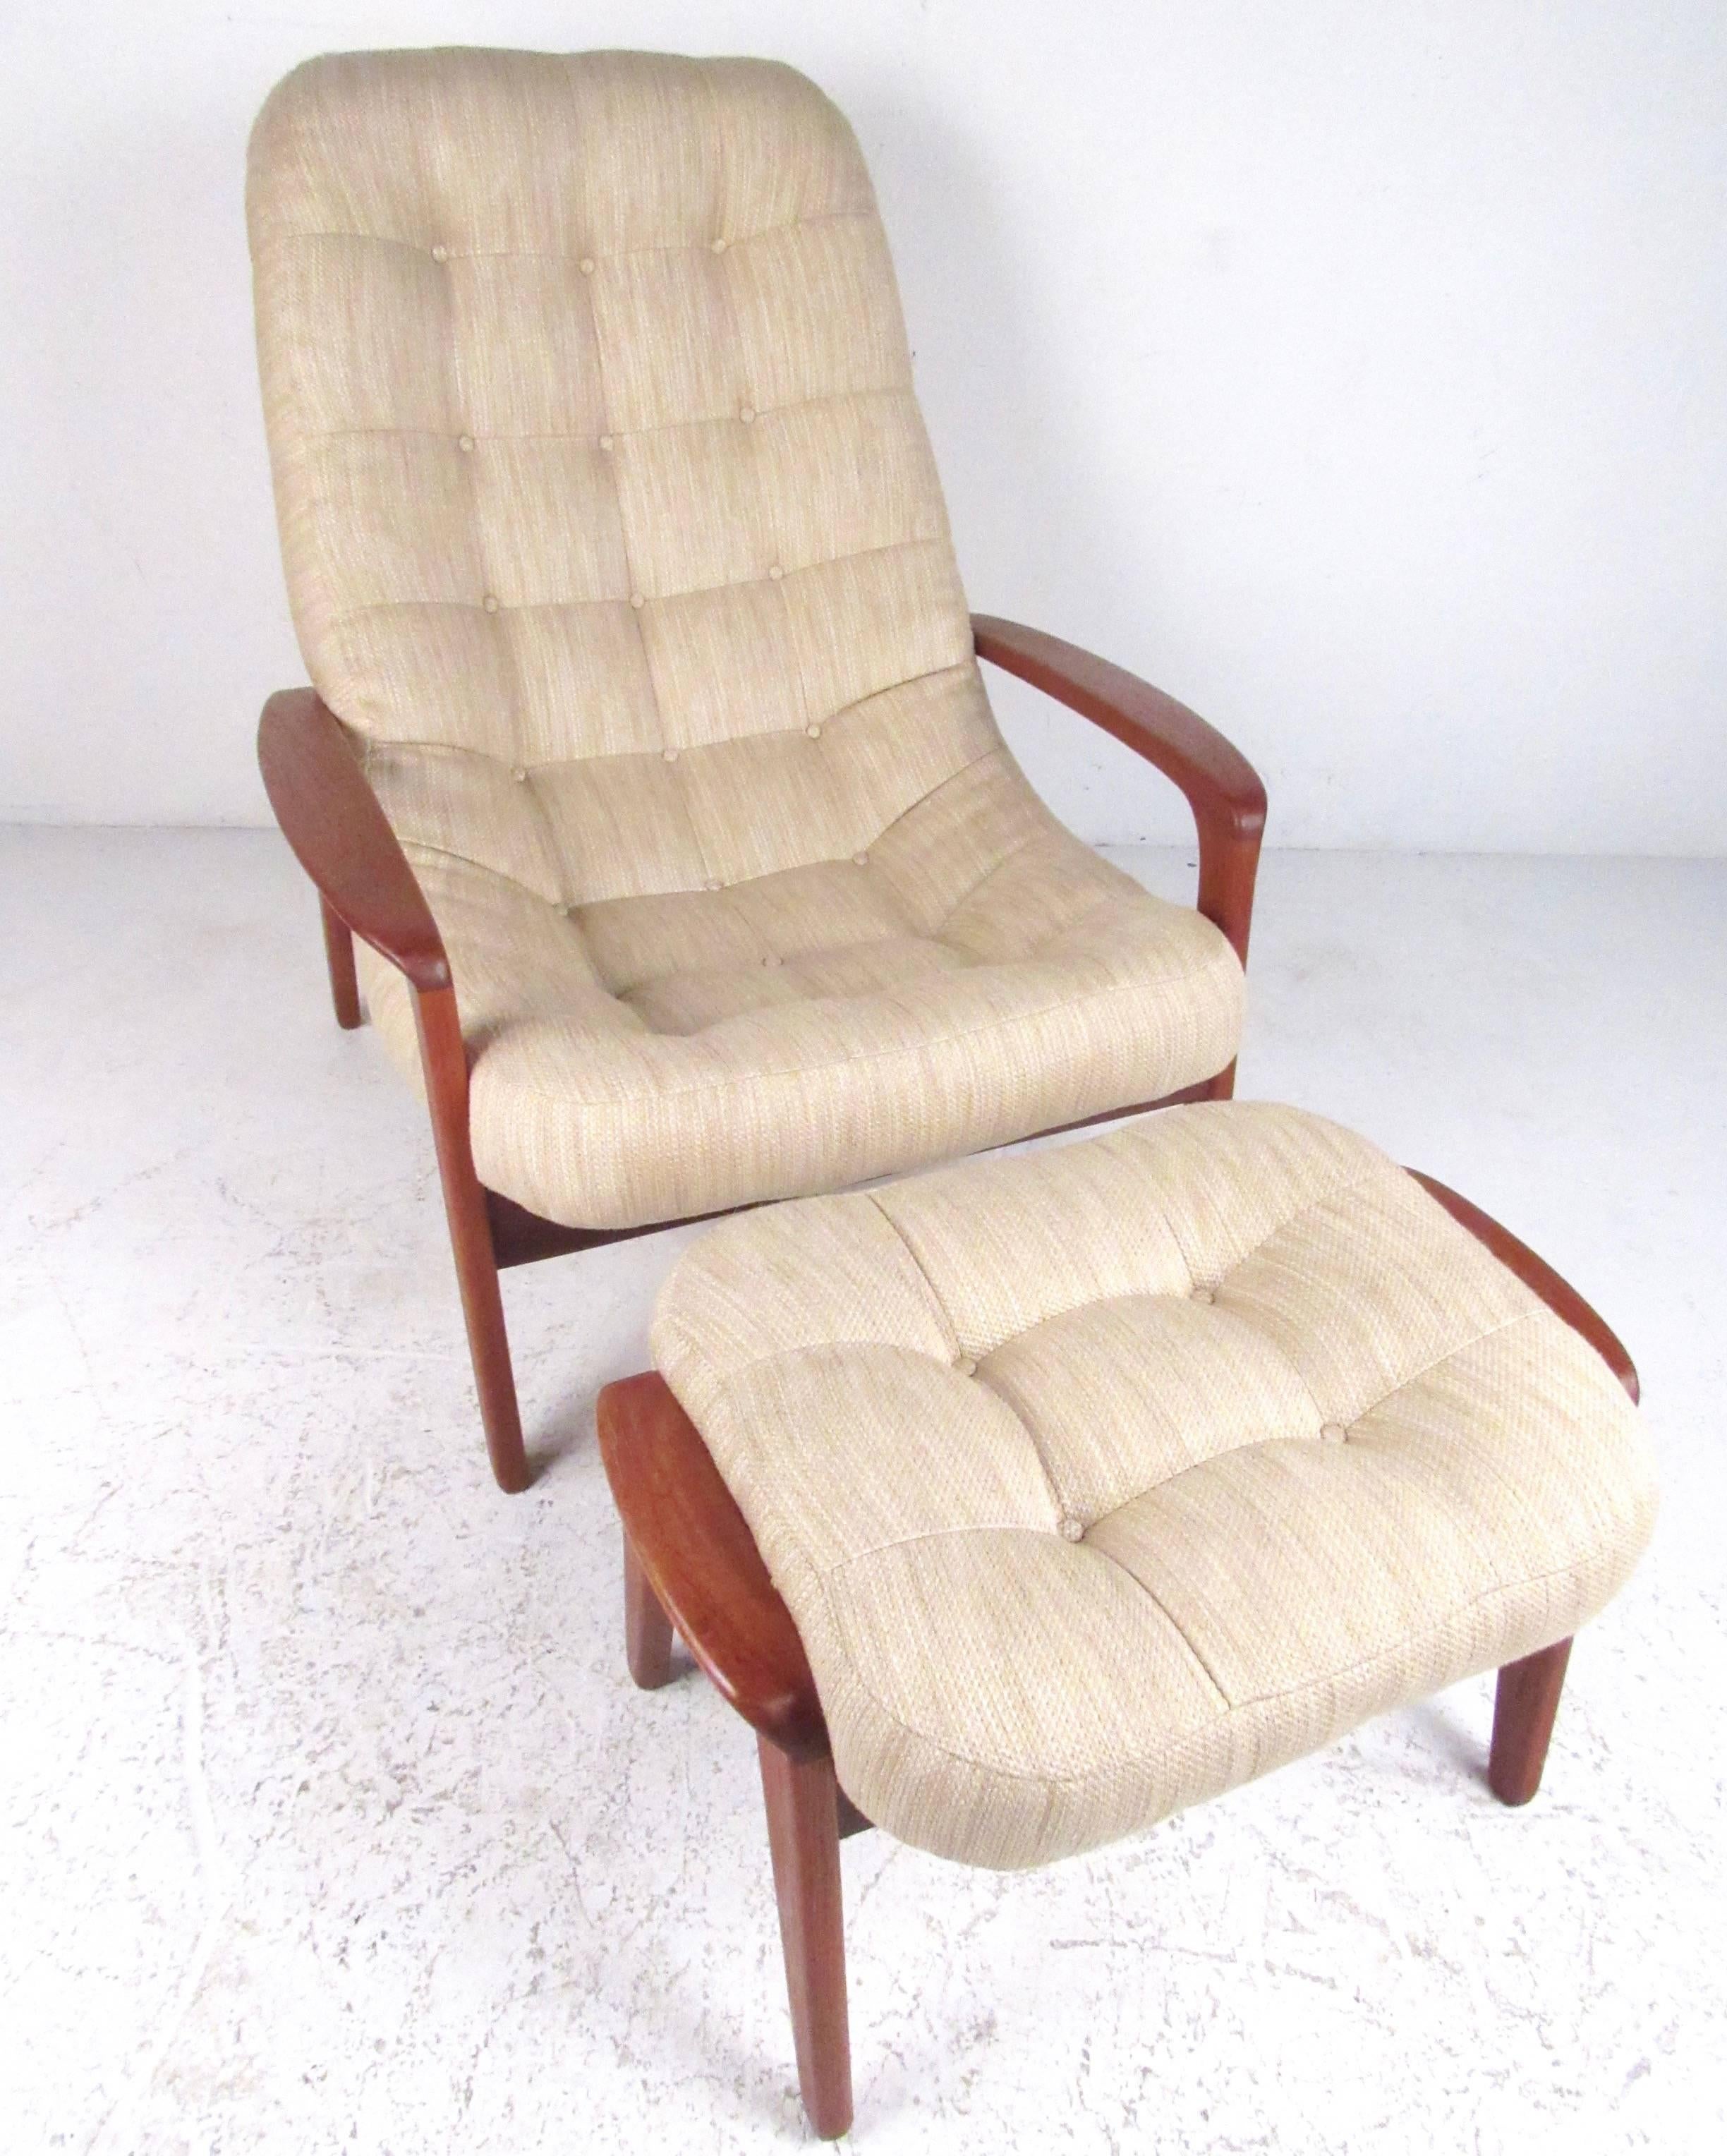 This unique vintage modern lounge chair features a sturdy teak frame with comfortable sloped back, sculpted teak arm rests, and matching upholstered ottoman. The stylish design of this vintage Canadian made set make a striking addition to home or